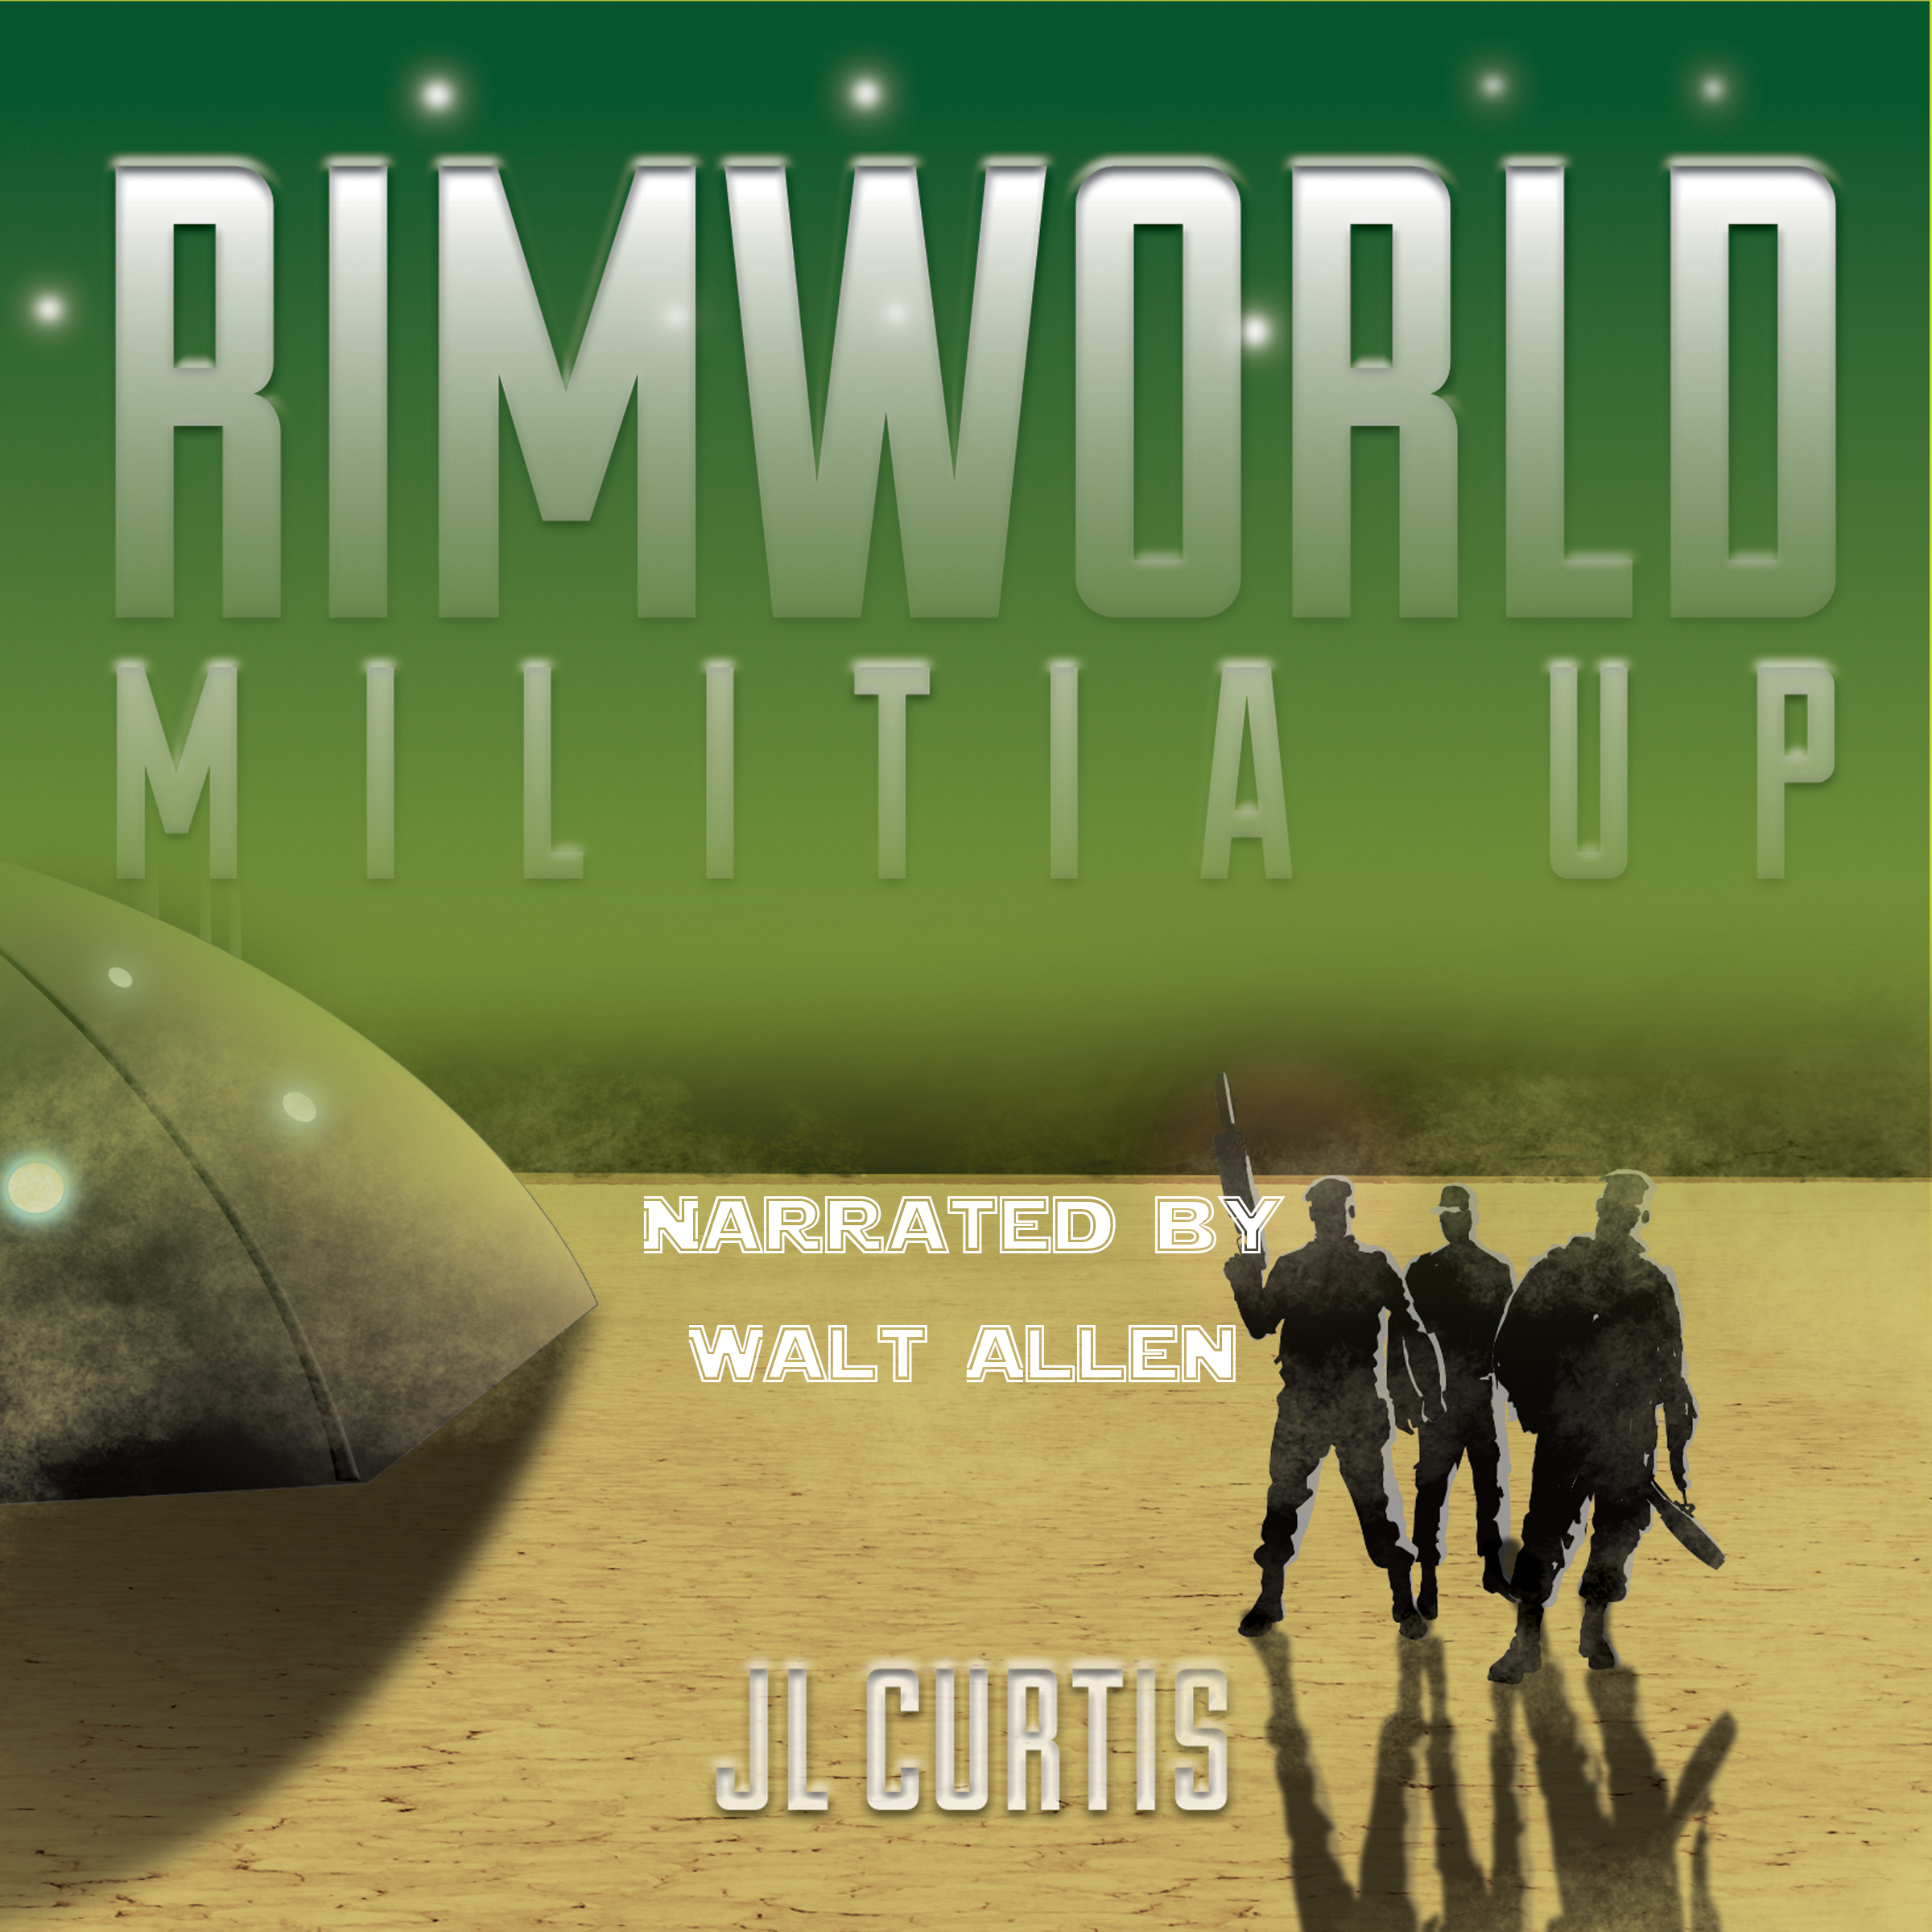 Love a great Science fiction audiobook? Then you’ll want to check out the Newest title from JL Curtis, Rimworld, Militia Up!